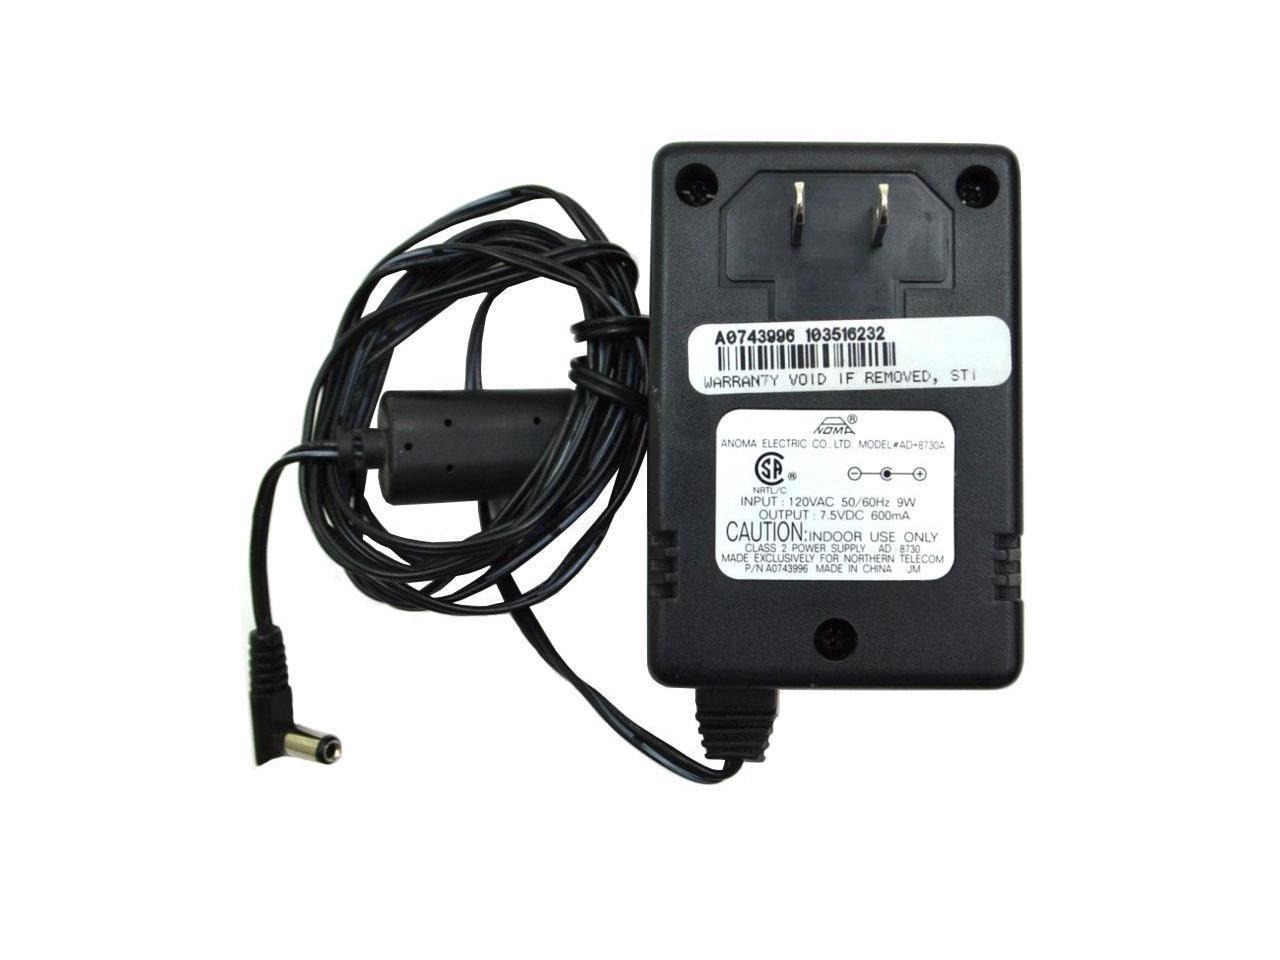 Nortel A0619627 16v 500ma AC Adapter Power Supply for sale online 